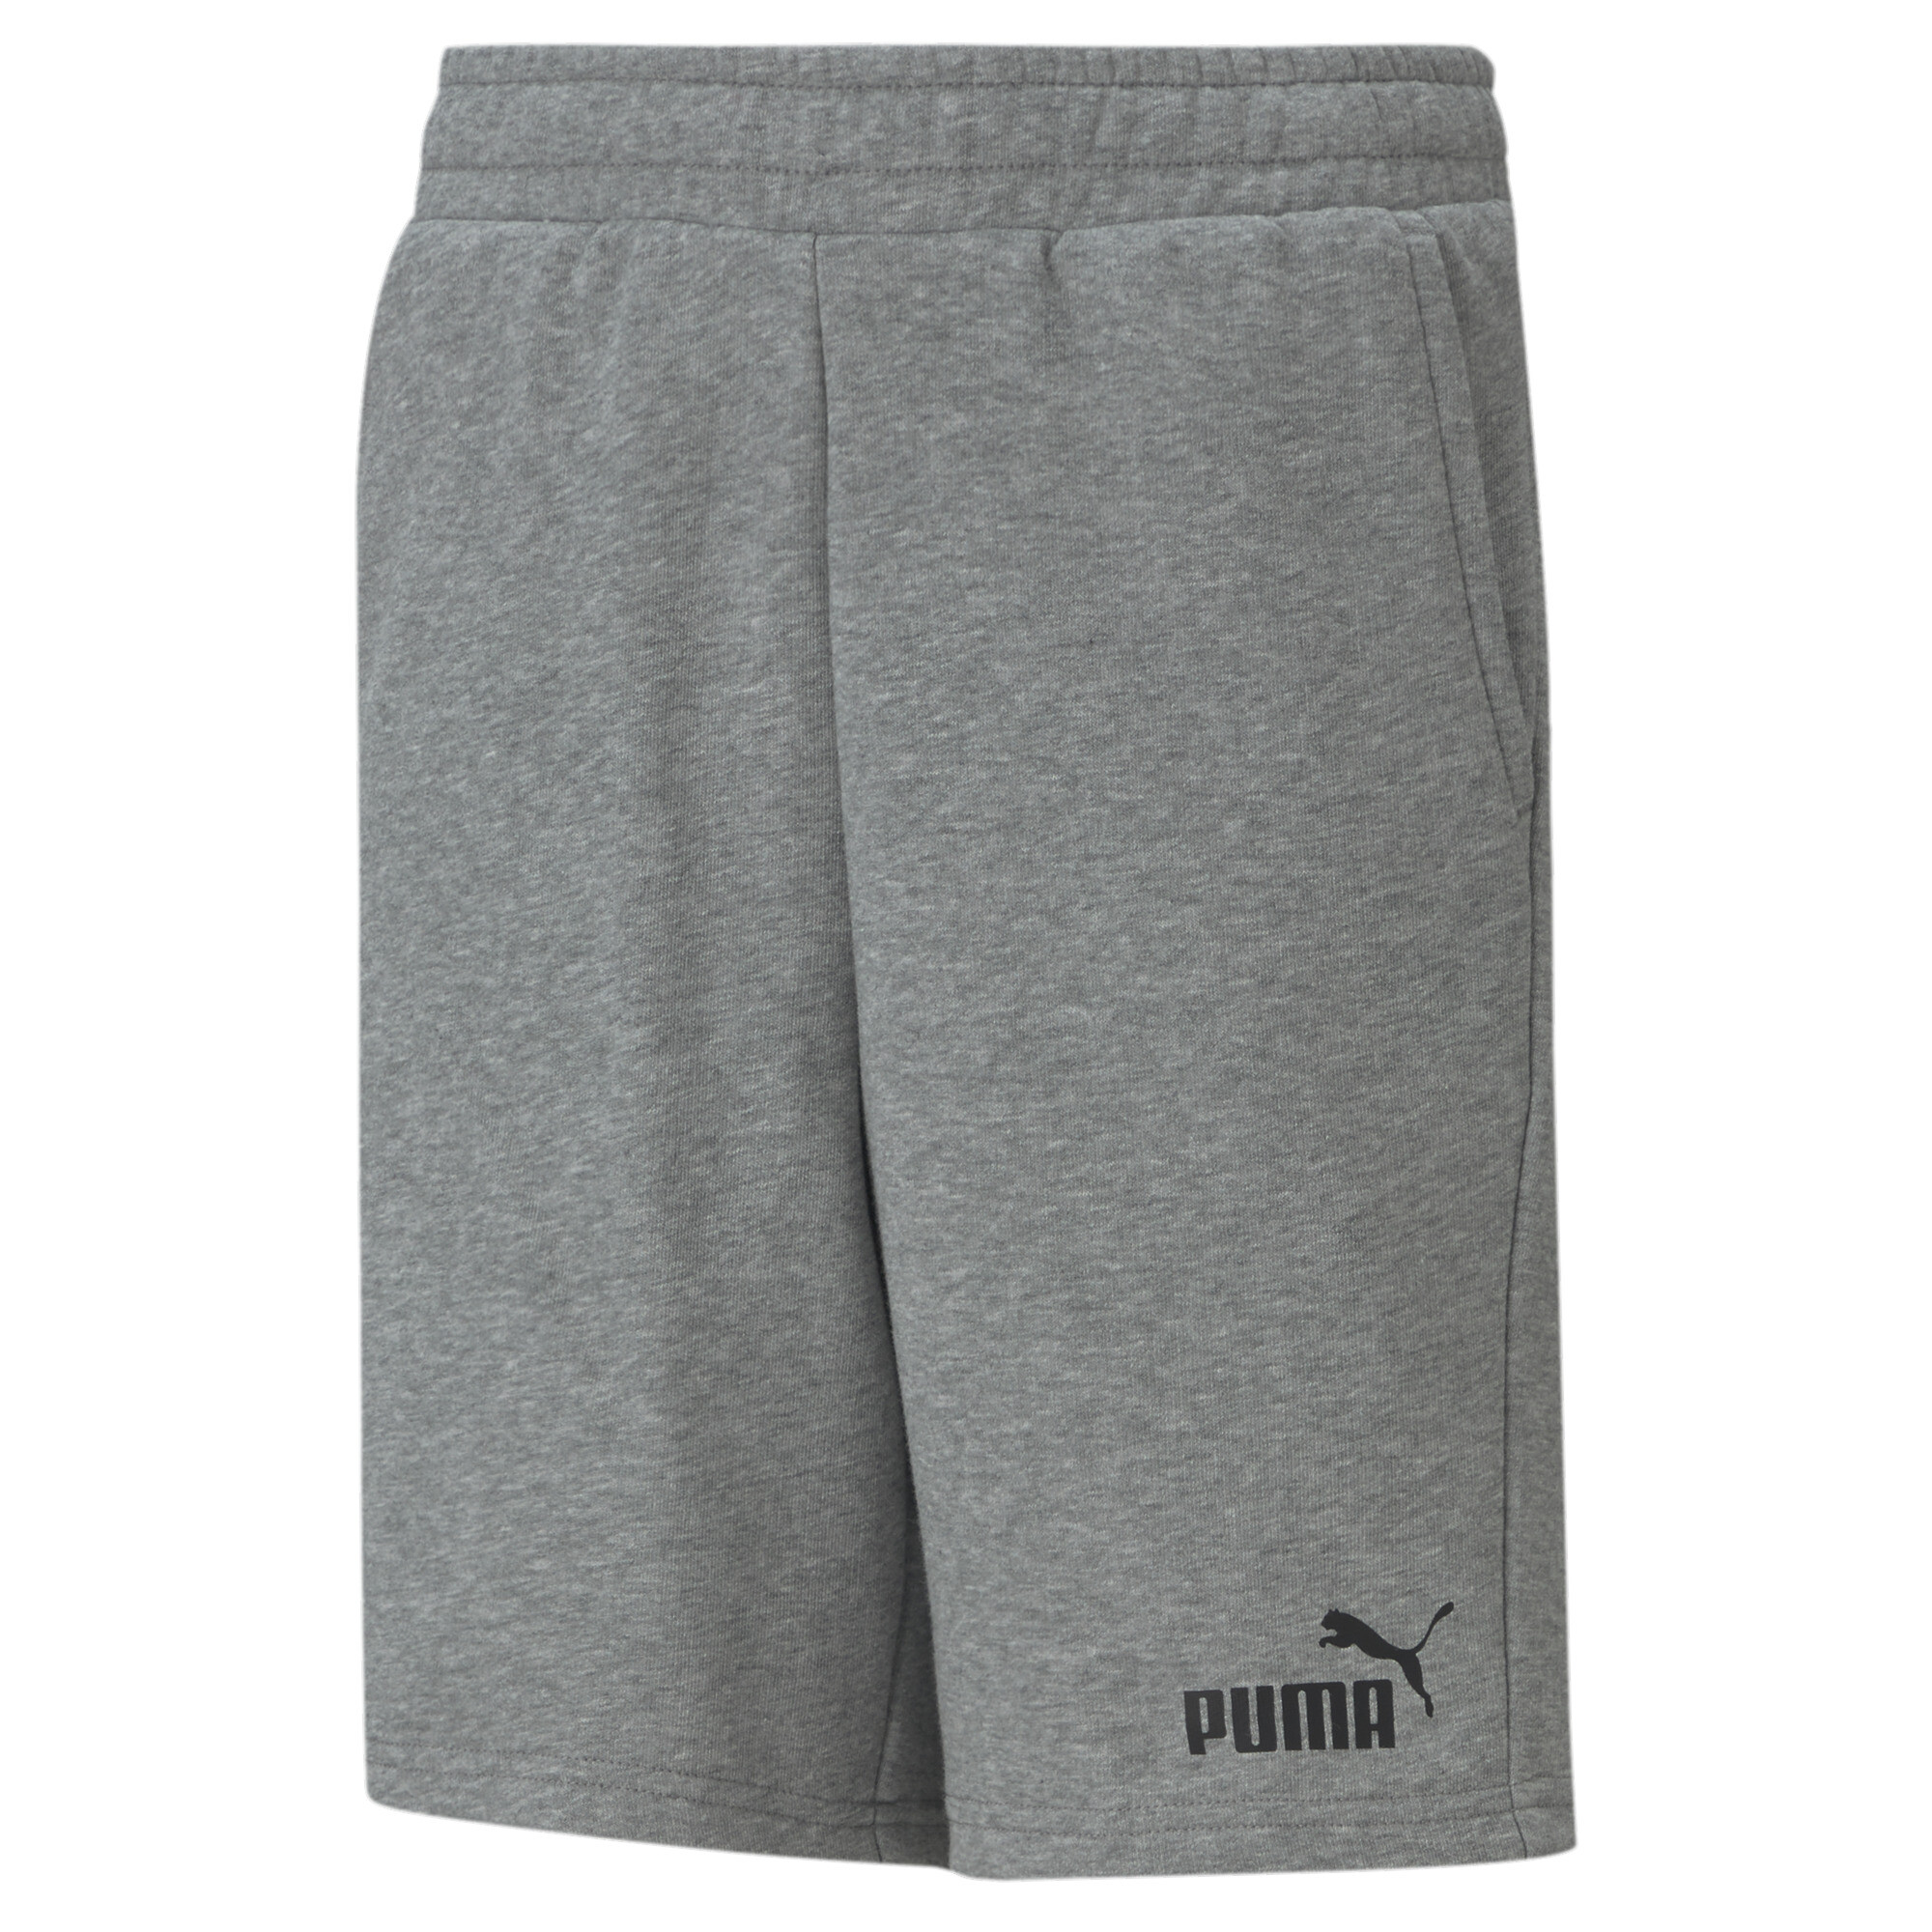 PUMA Essentials Sweat Shorts In Heather, Size 15-16 Youth